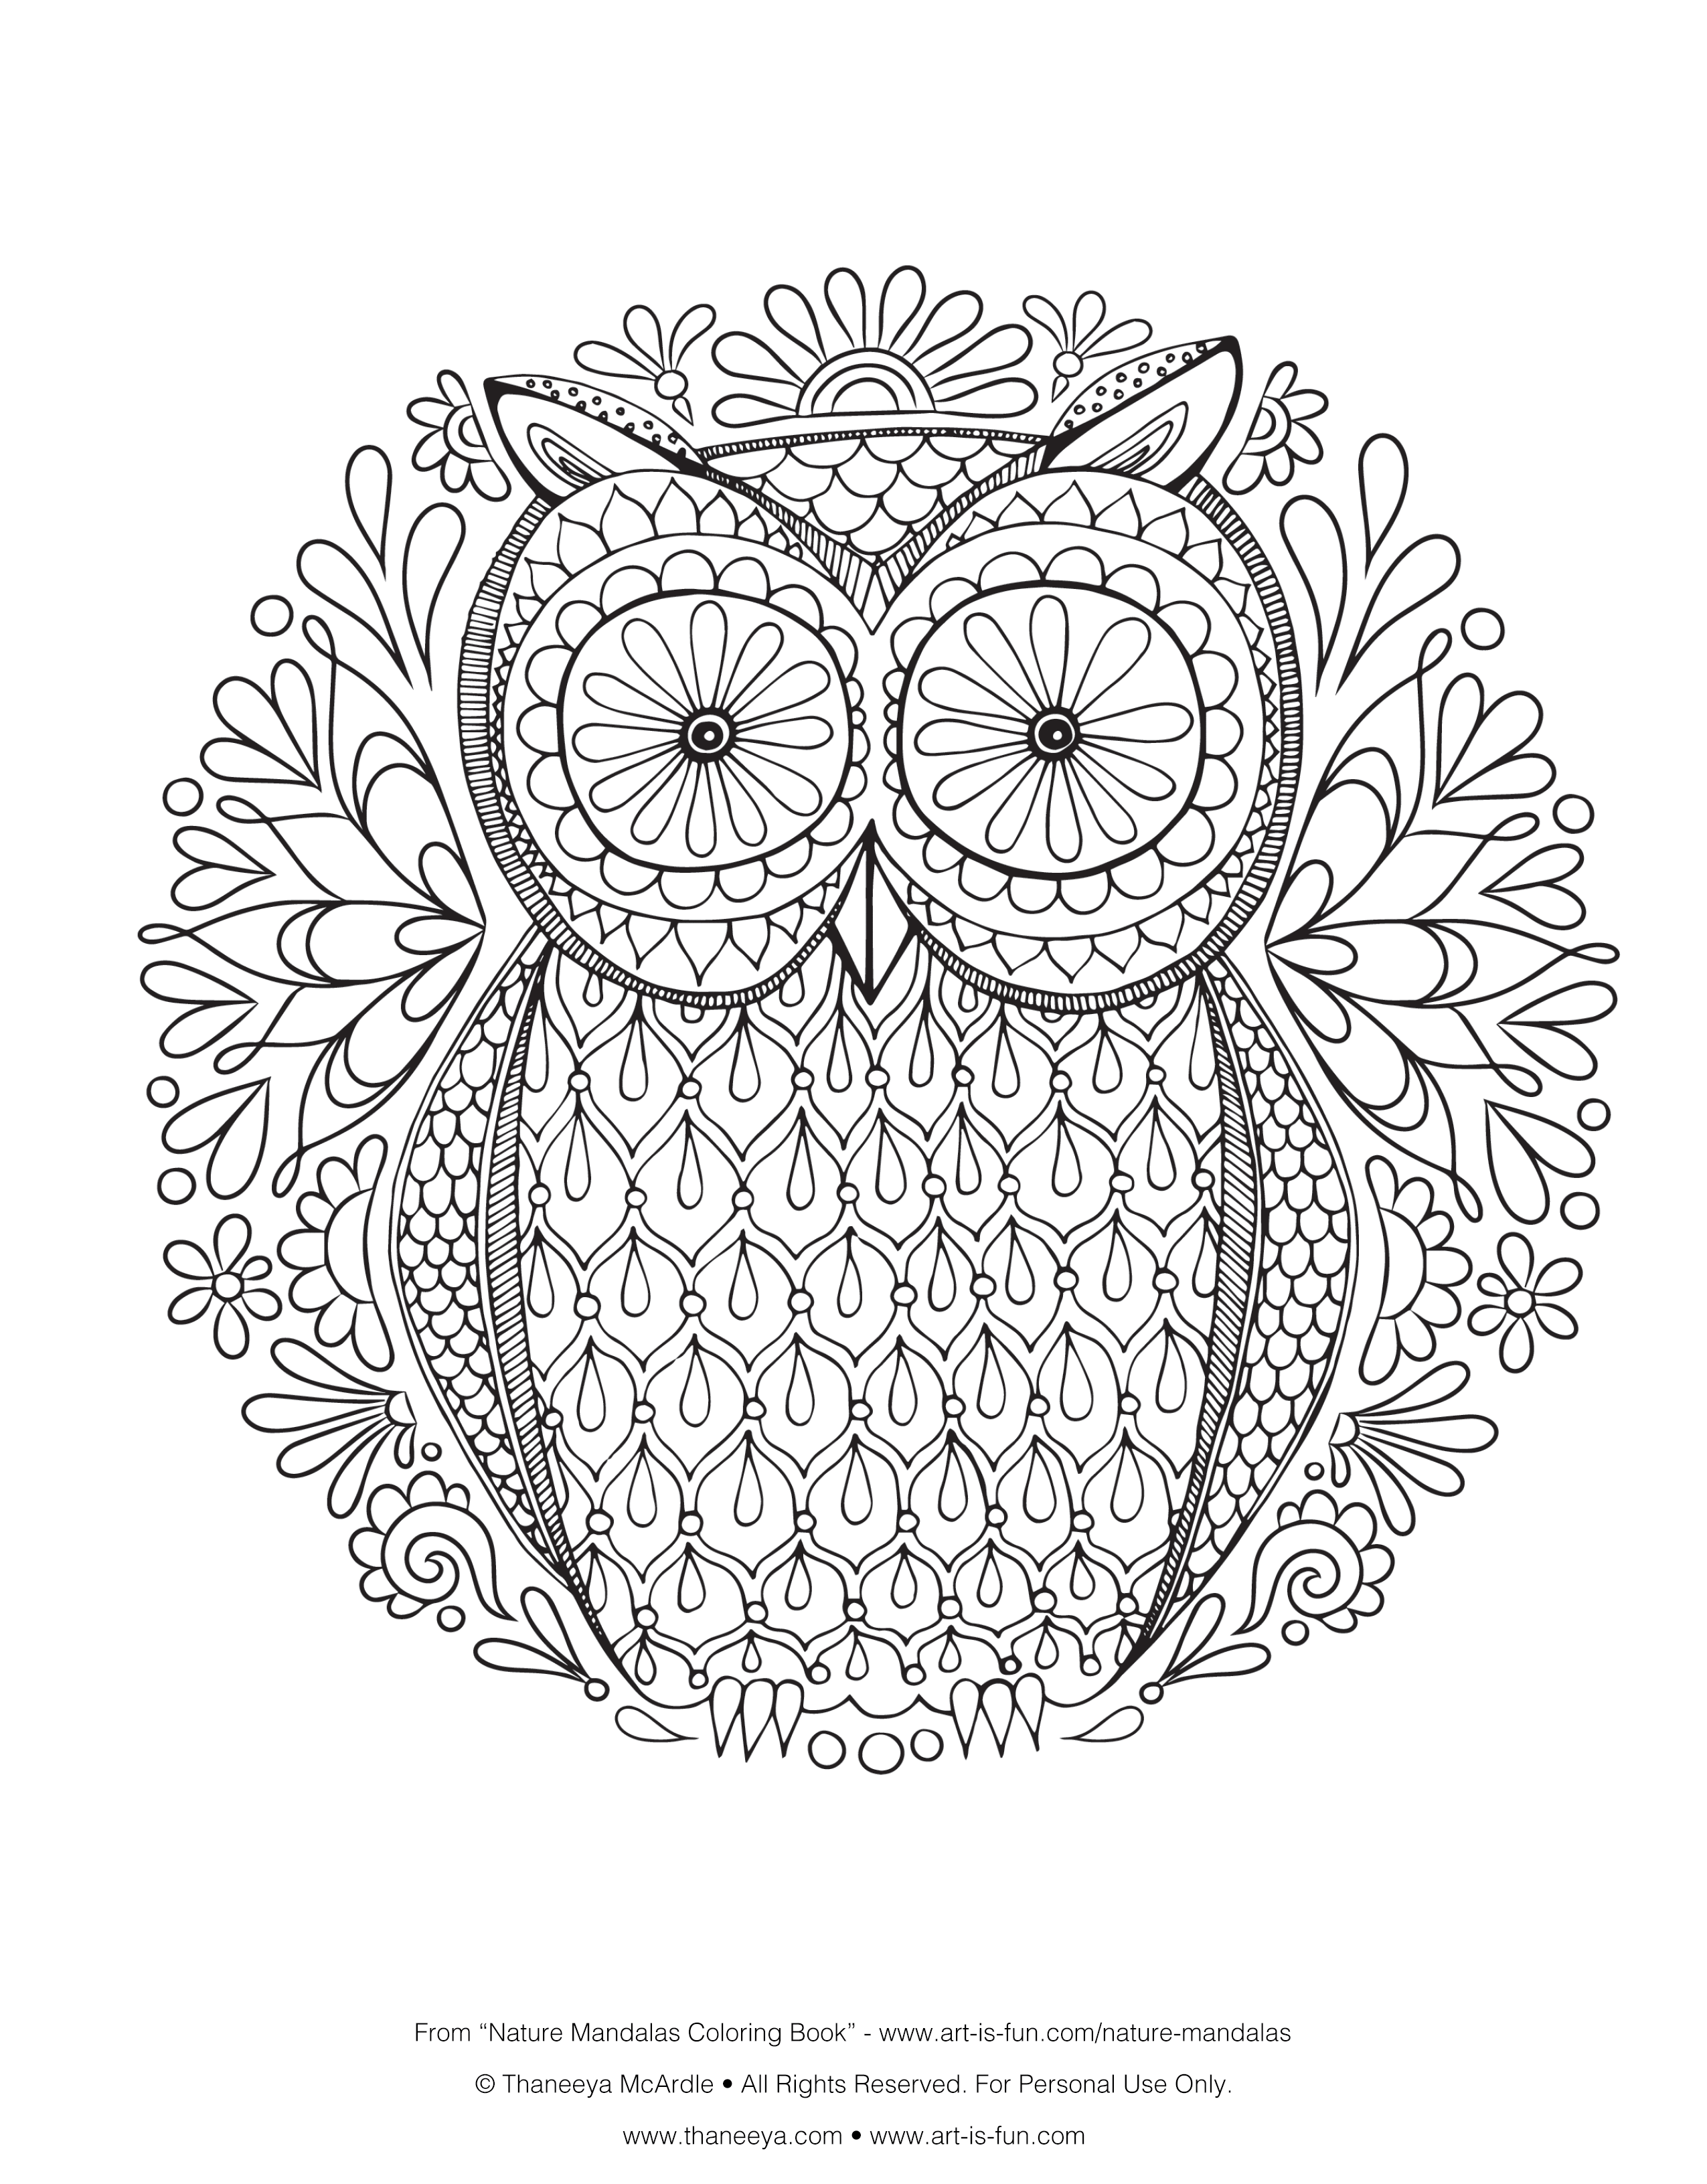 Free Colorama Coloring Pages Download Free Colorama Coloring Pages Png Images Free Cliparts On Clipart Library